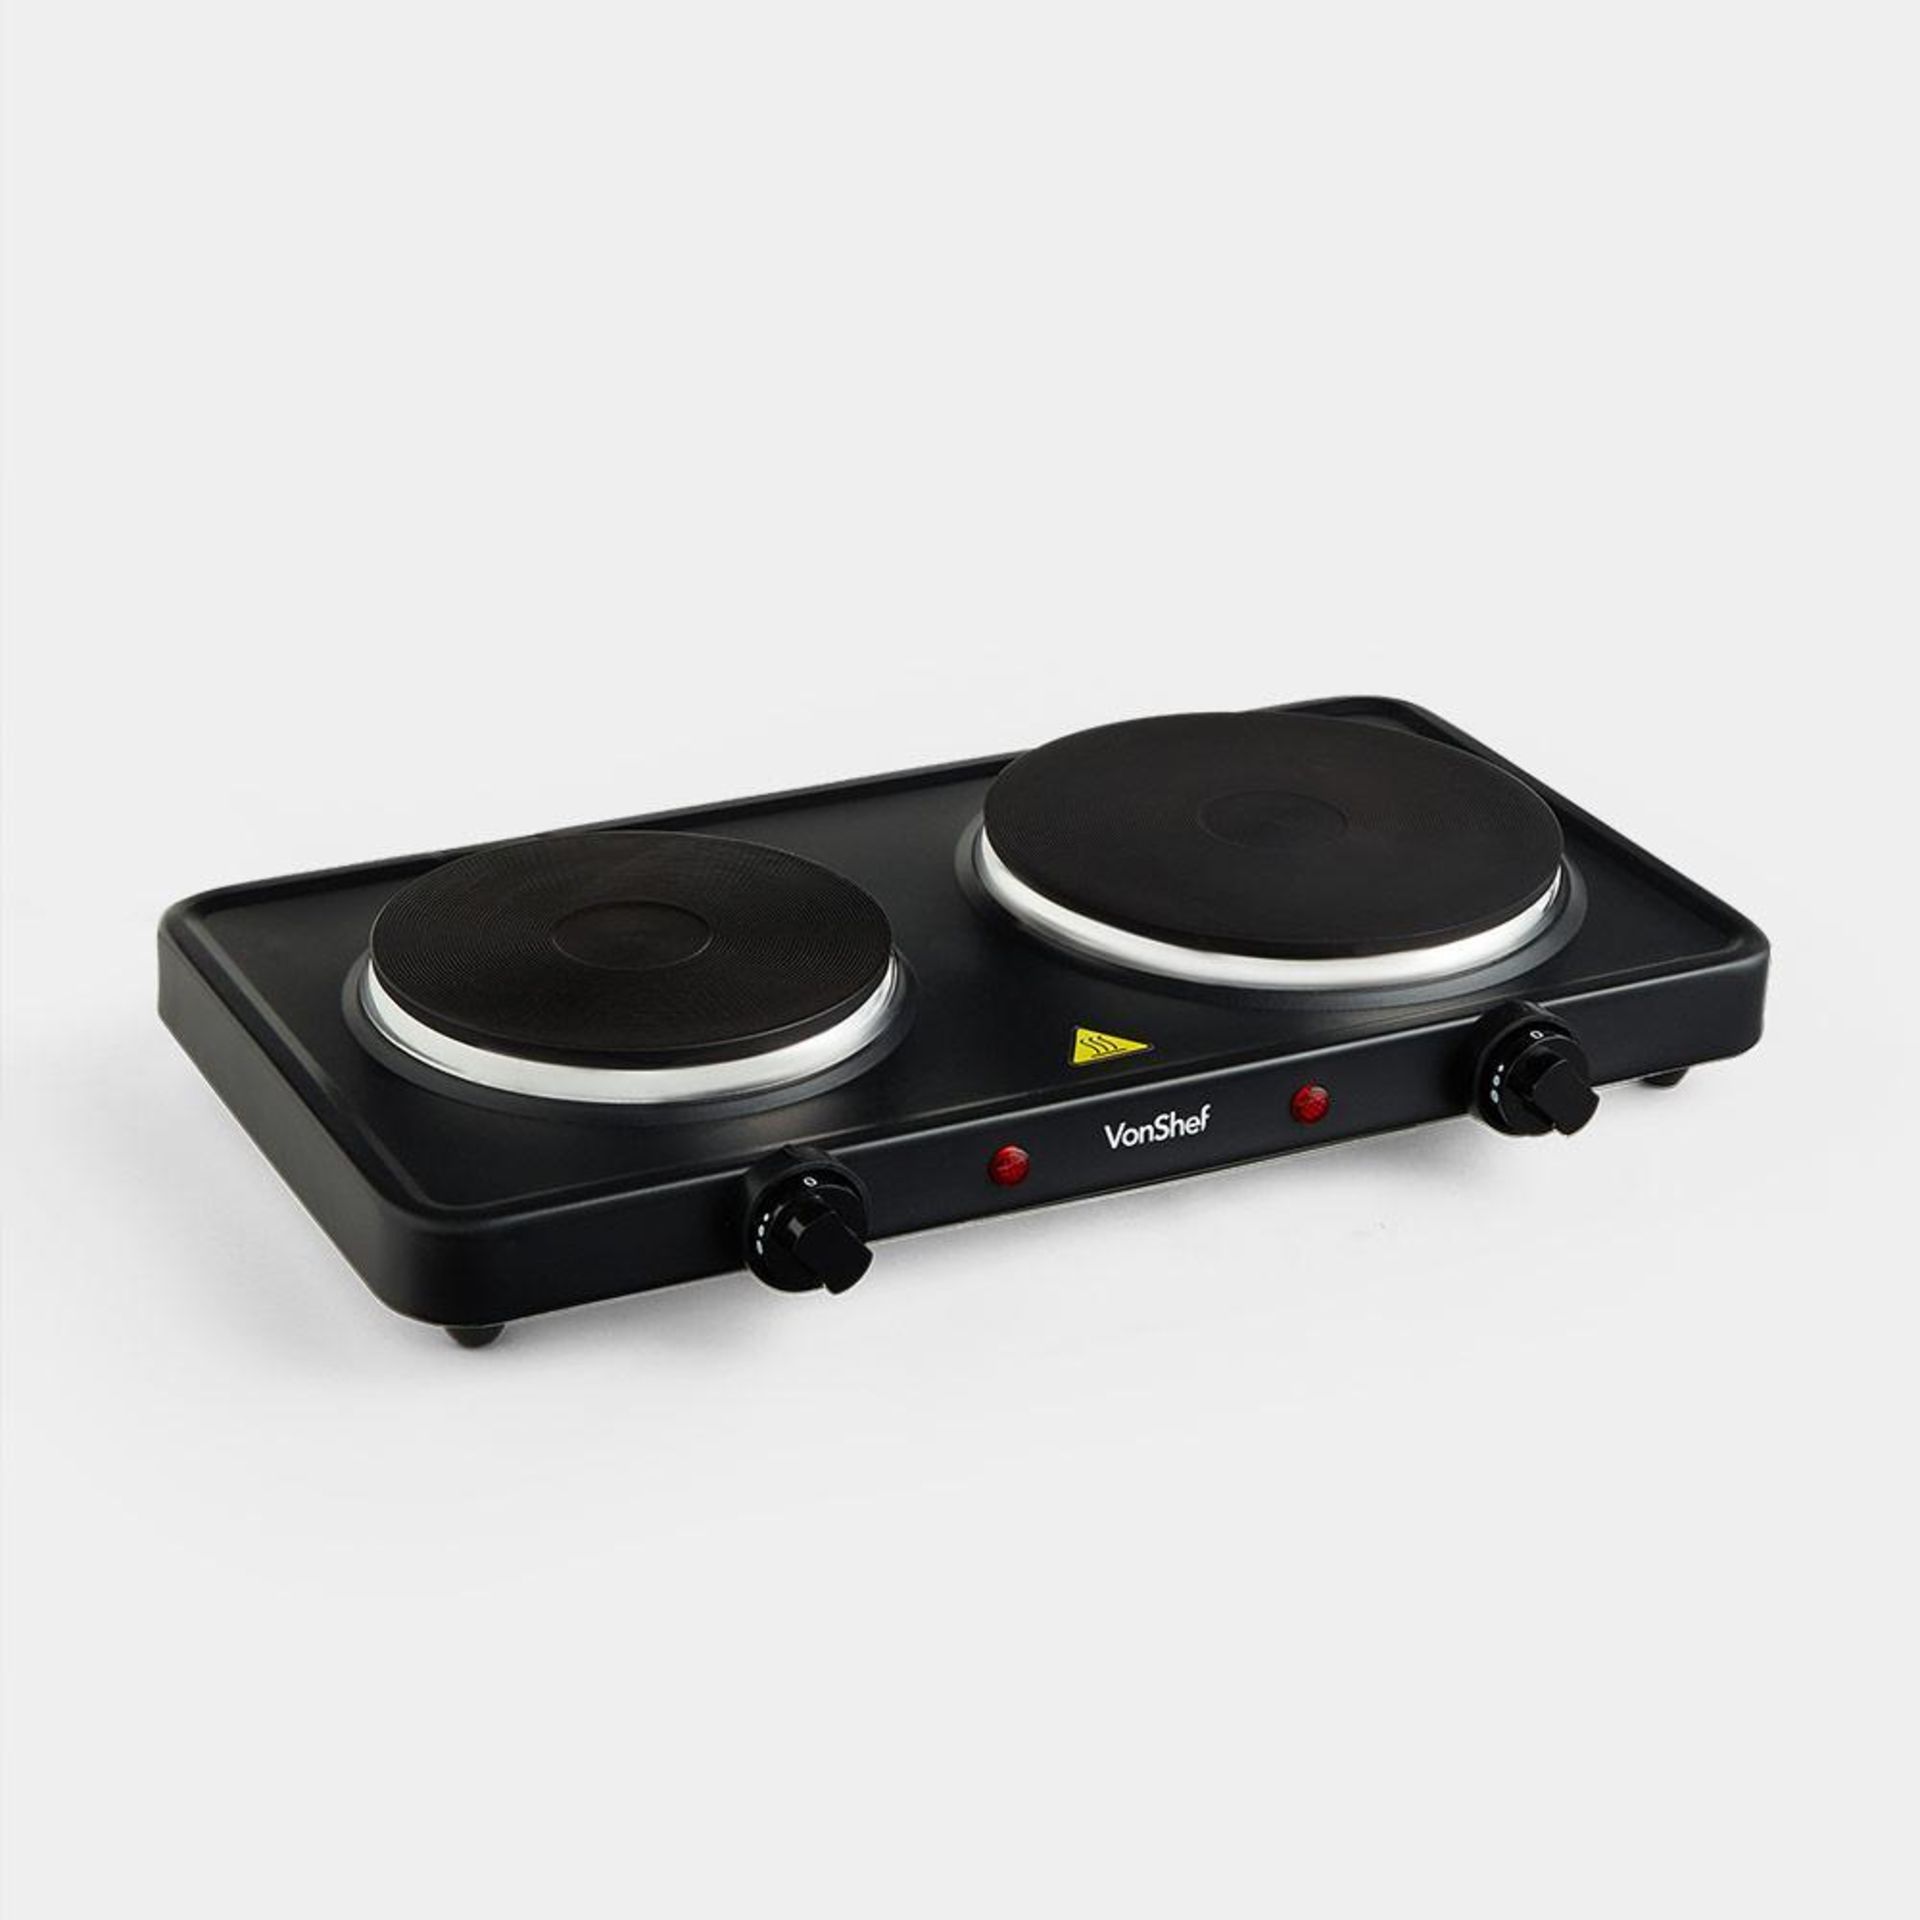 Double Hot Plate - ER50. This VonShef Double Hot Plate is small but mighty. Completely portable &